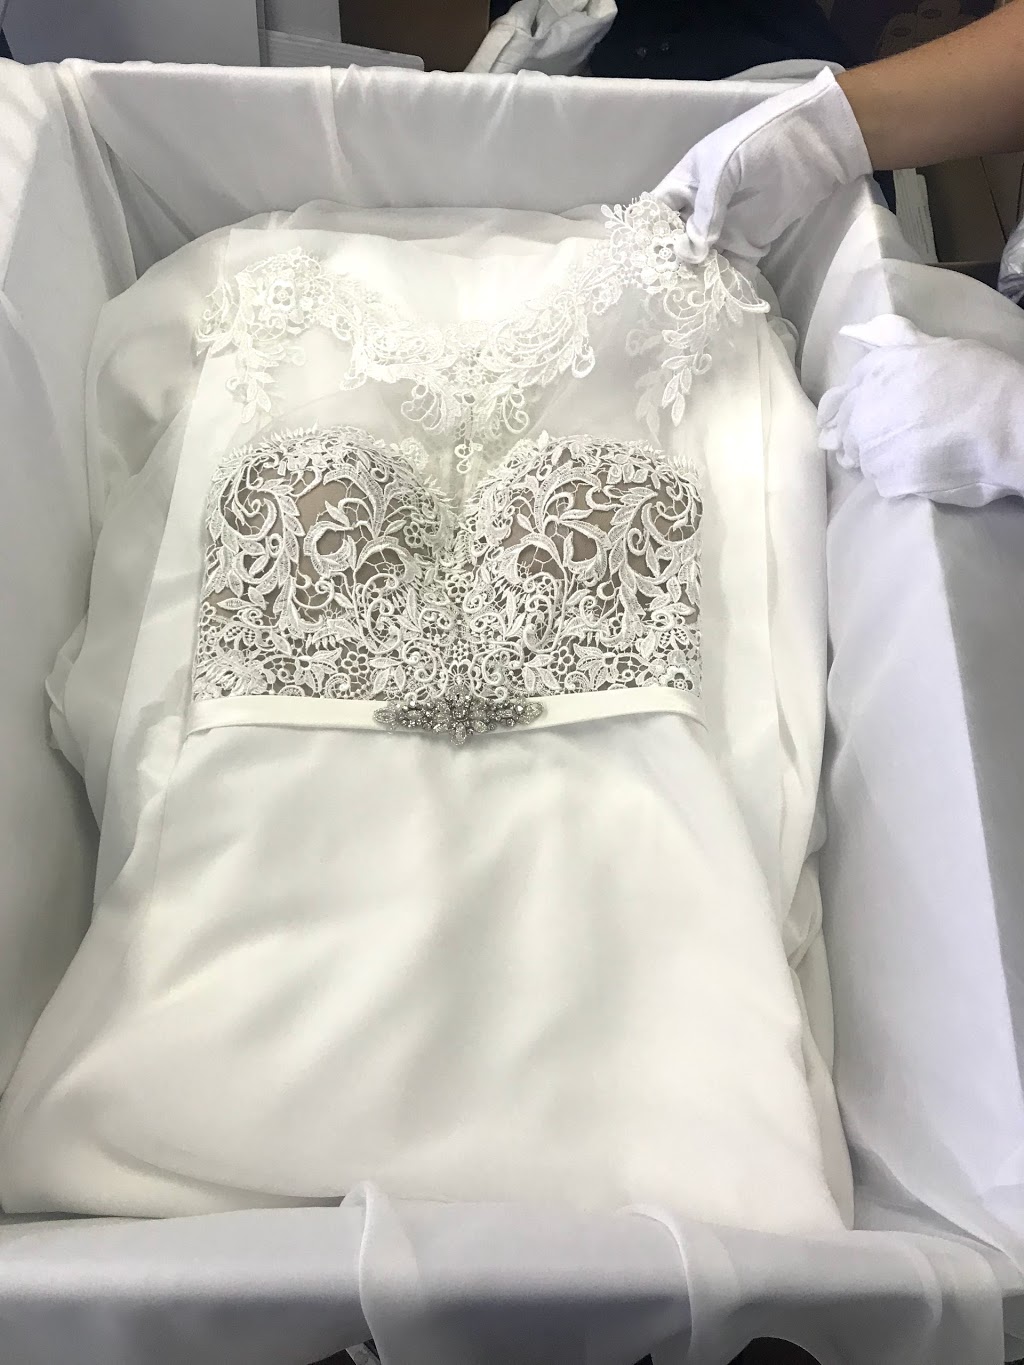 The Wedding Dress Specialists | laundry | 270 Sandgate Rd, Albion QLD 4010, Australia | 0433021510 OR +61 433 021 510